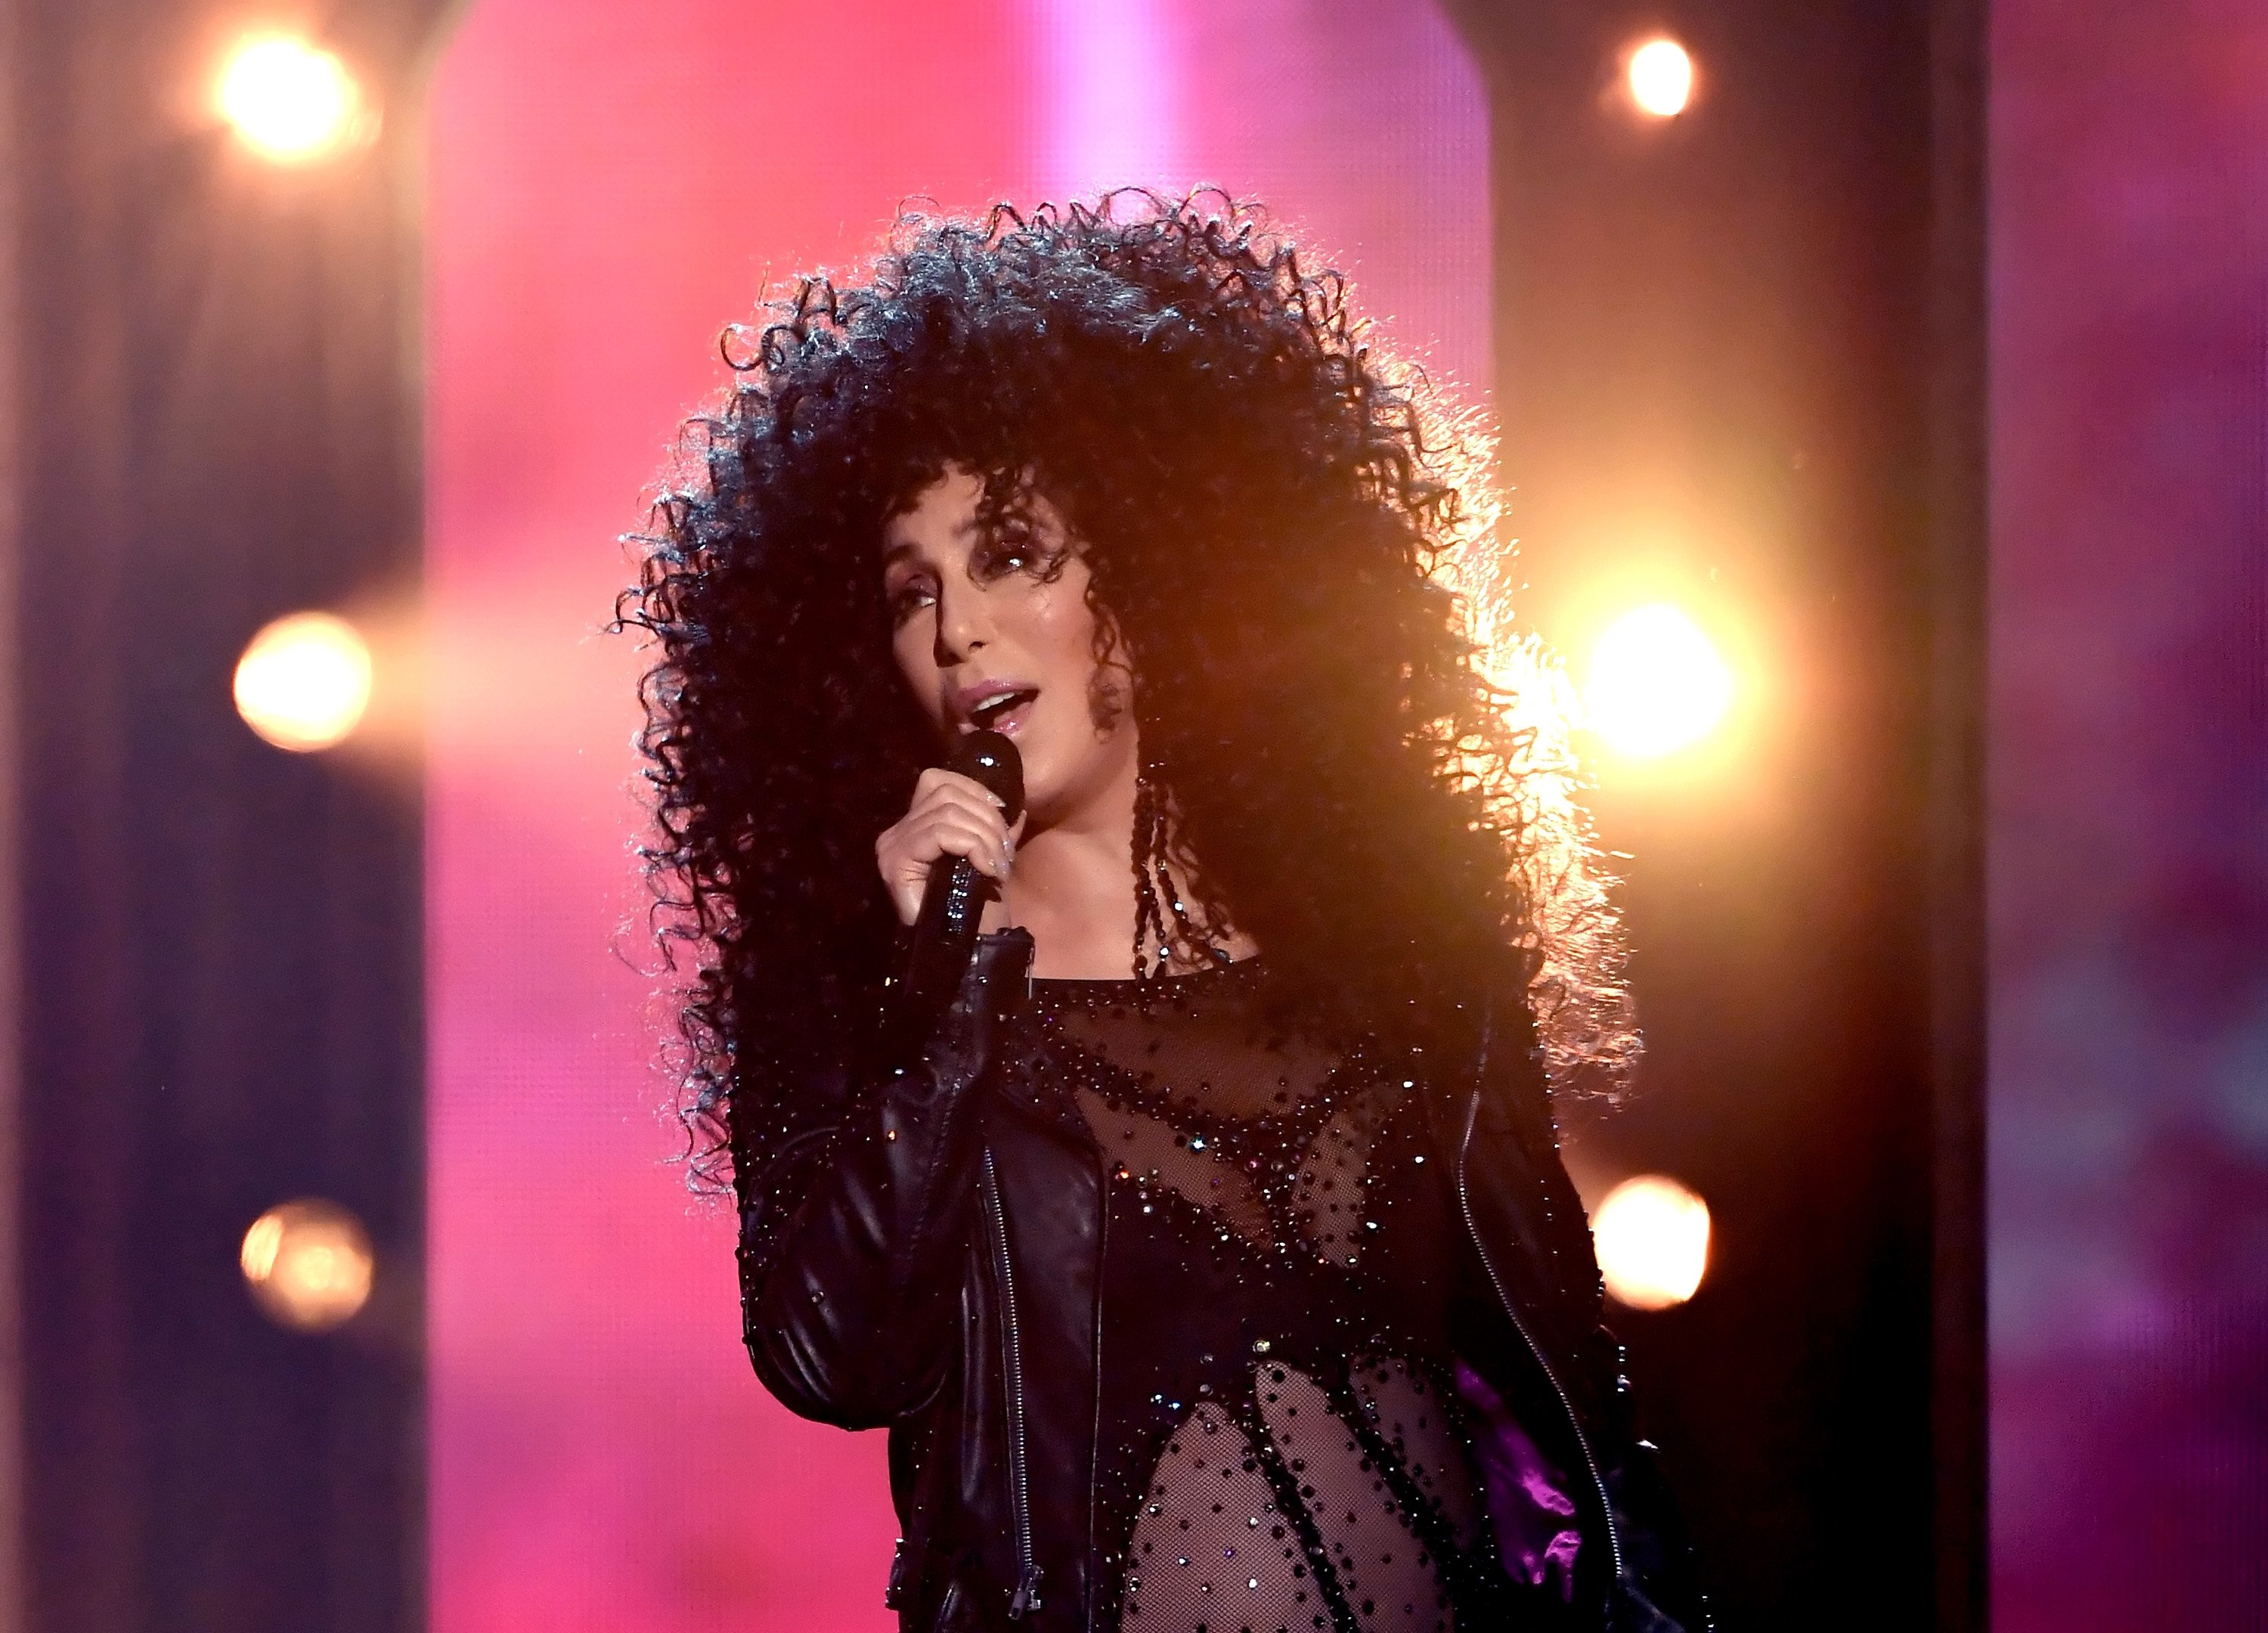 Cher: Known for her distinctive contralto singing voice, Six-decade-long career. 3000x2160 HD Background.